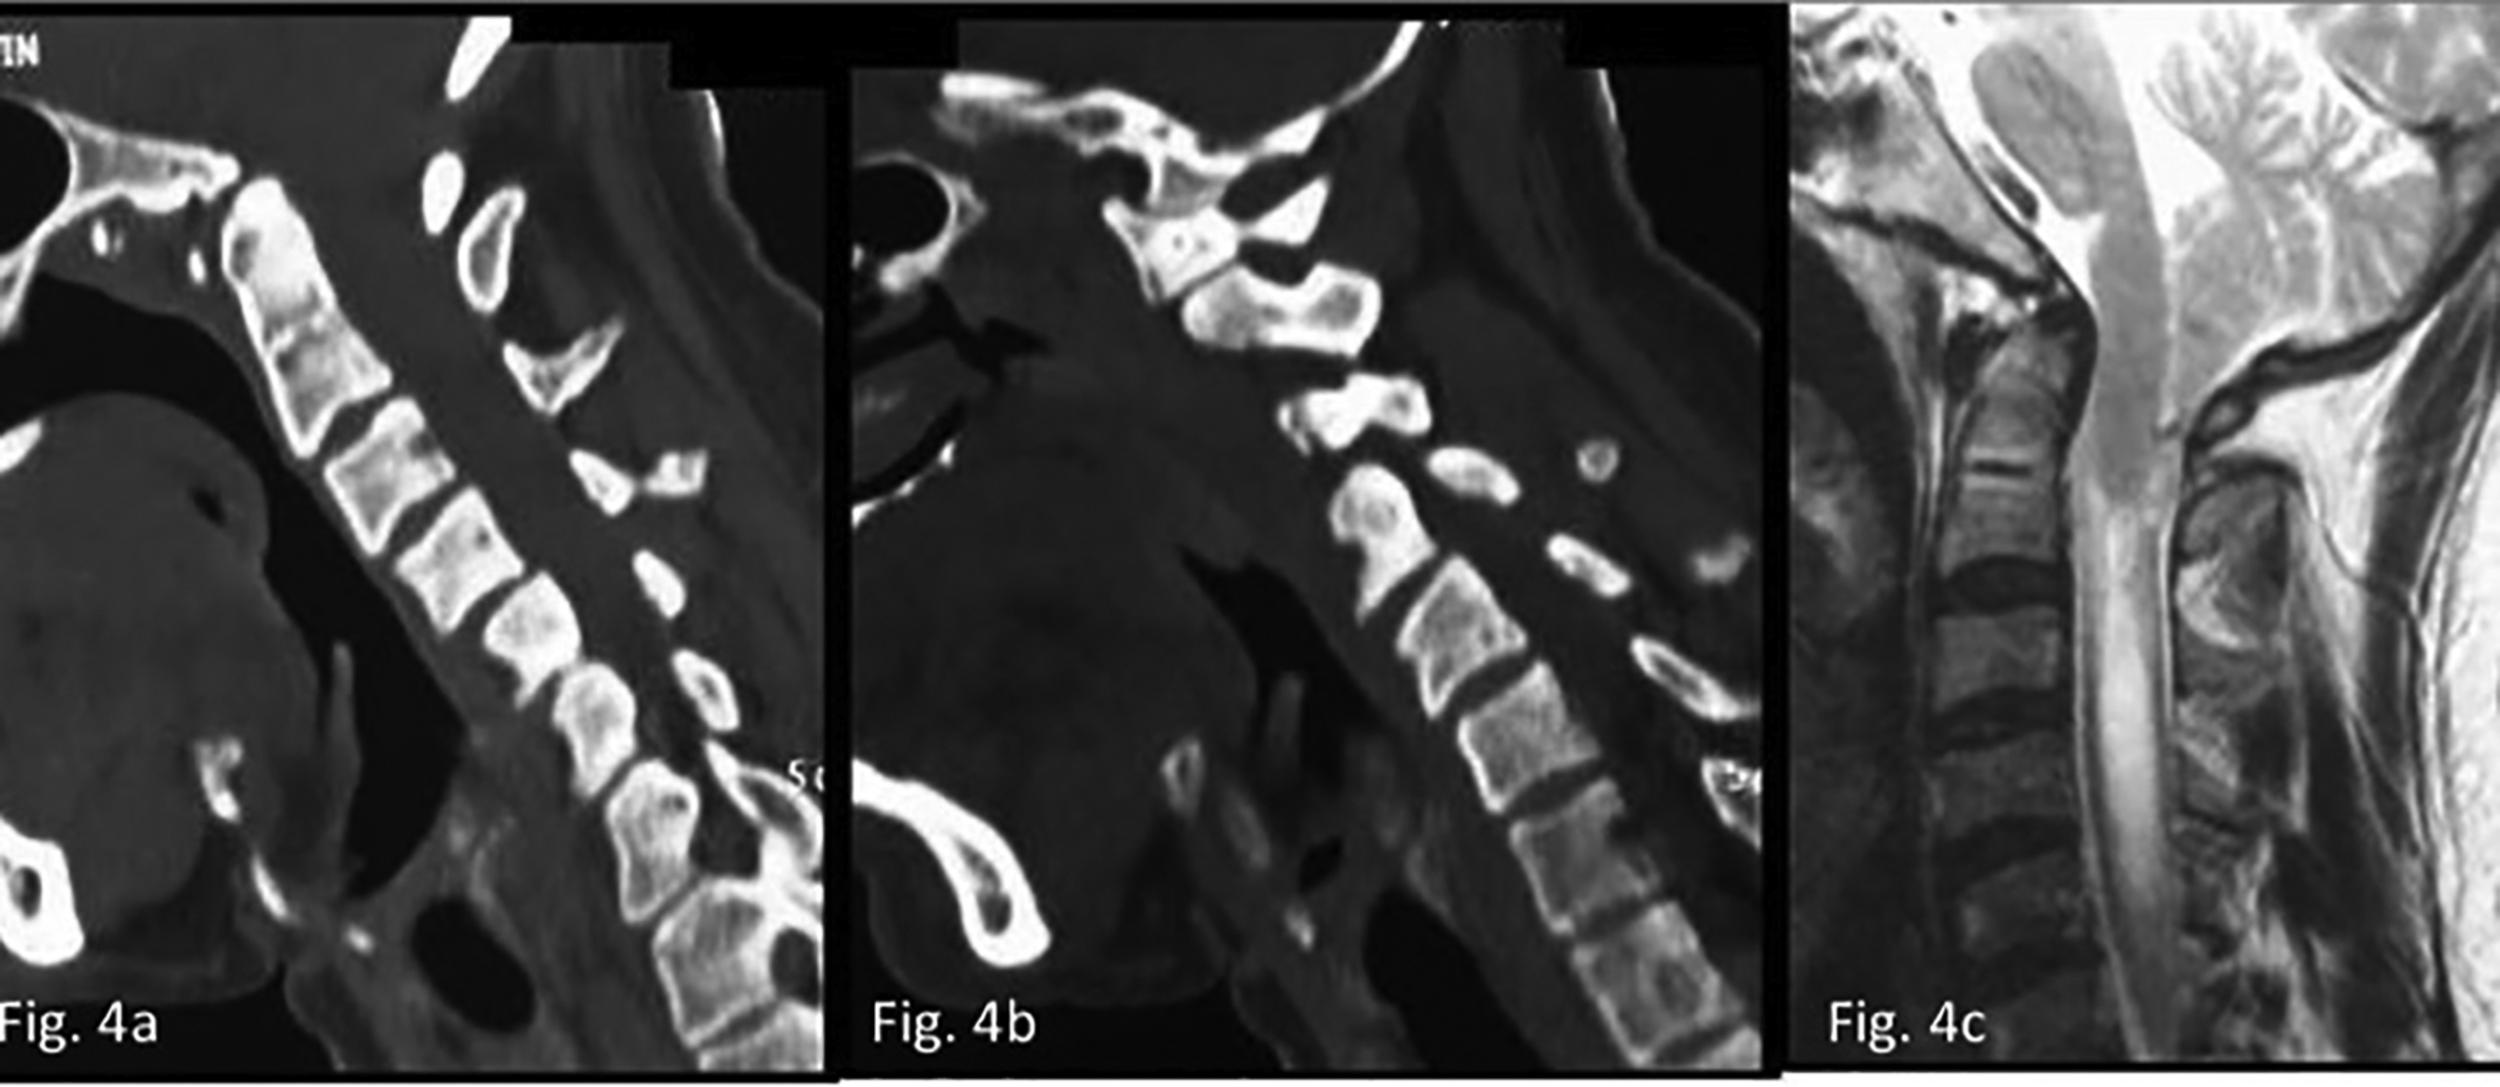 Fig. 5, (A) CT scan shows mild basilar invagination. There is no evidence of any clear atlantoaxial instability as assessed by increased atlantodental interval. (B) Sagittal image of the facets does not show any malalignment. The dislocation in this case is an example of type C facet instability and is identified only during direct surgical handling. (C) Magnetic resonance imaging shows basilar invagination, Chiari malformation, and syringomyelia.